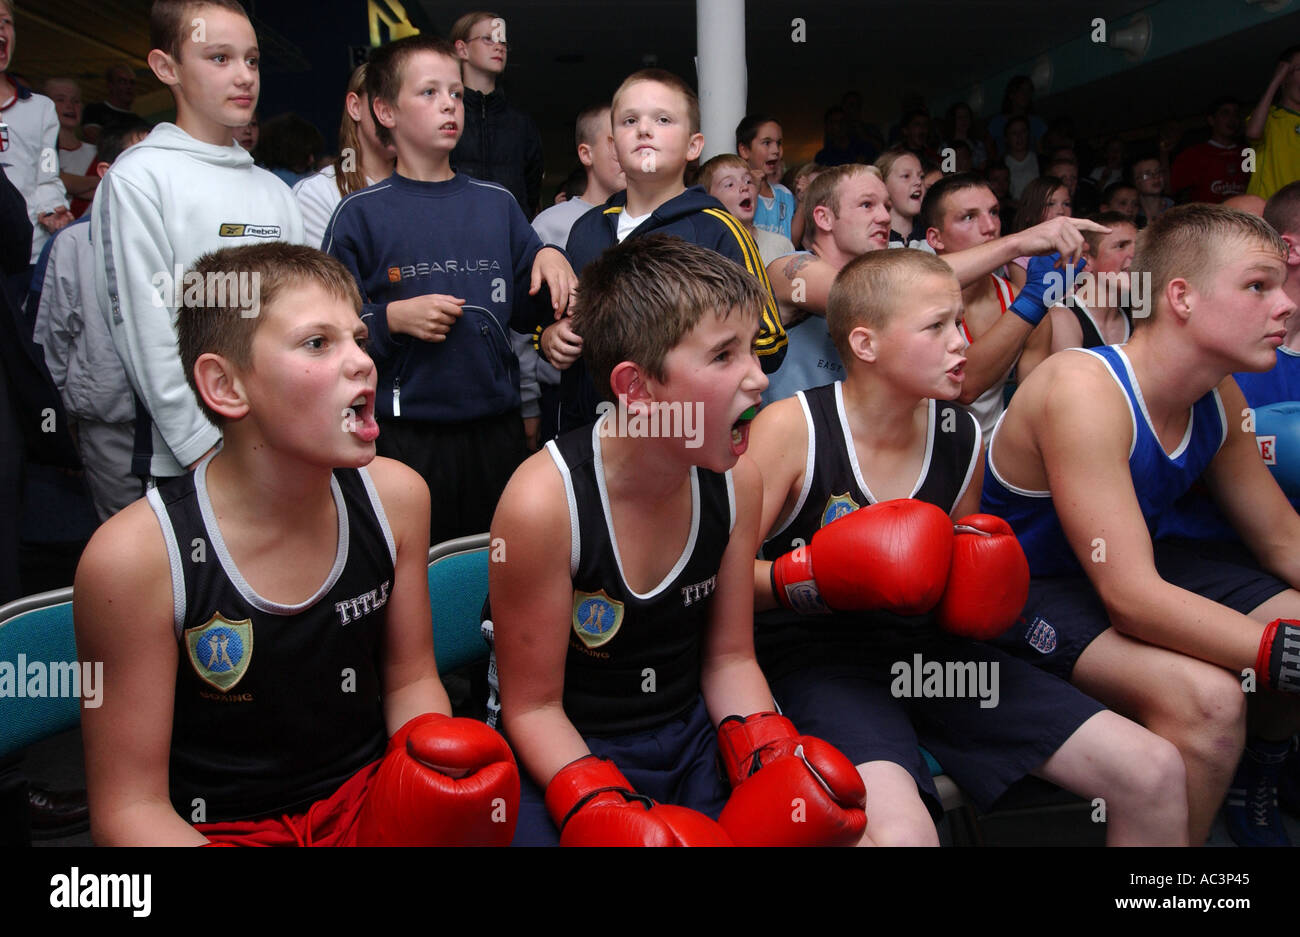 PHOTOGRAPH BY HOWARD BARLOW SUPPORTERS OF young Bolton Boxer AMIR KHAN watch him fight on TV at BOLTON Lads Girls Club Stock Photo